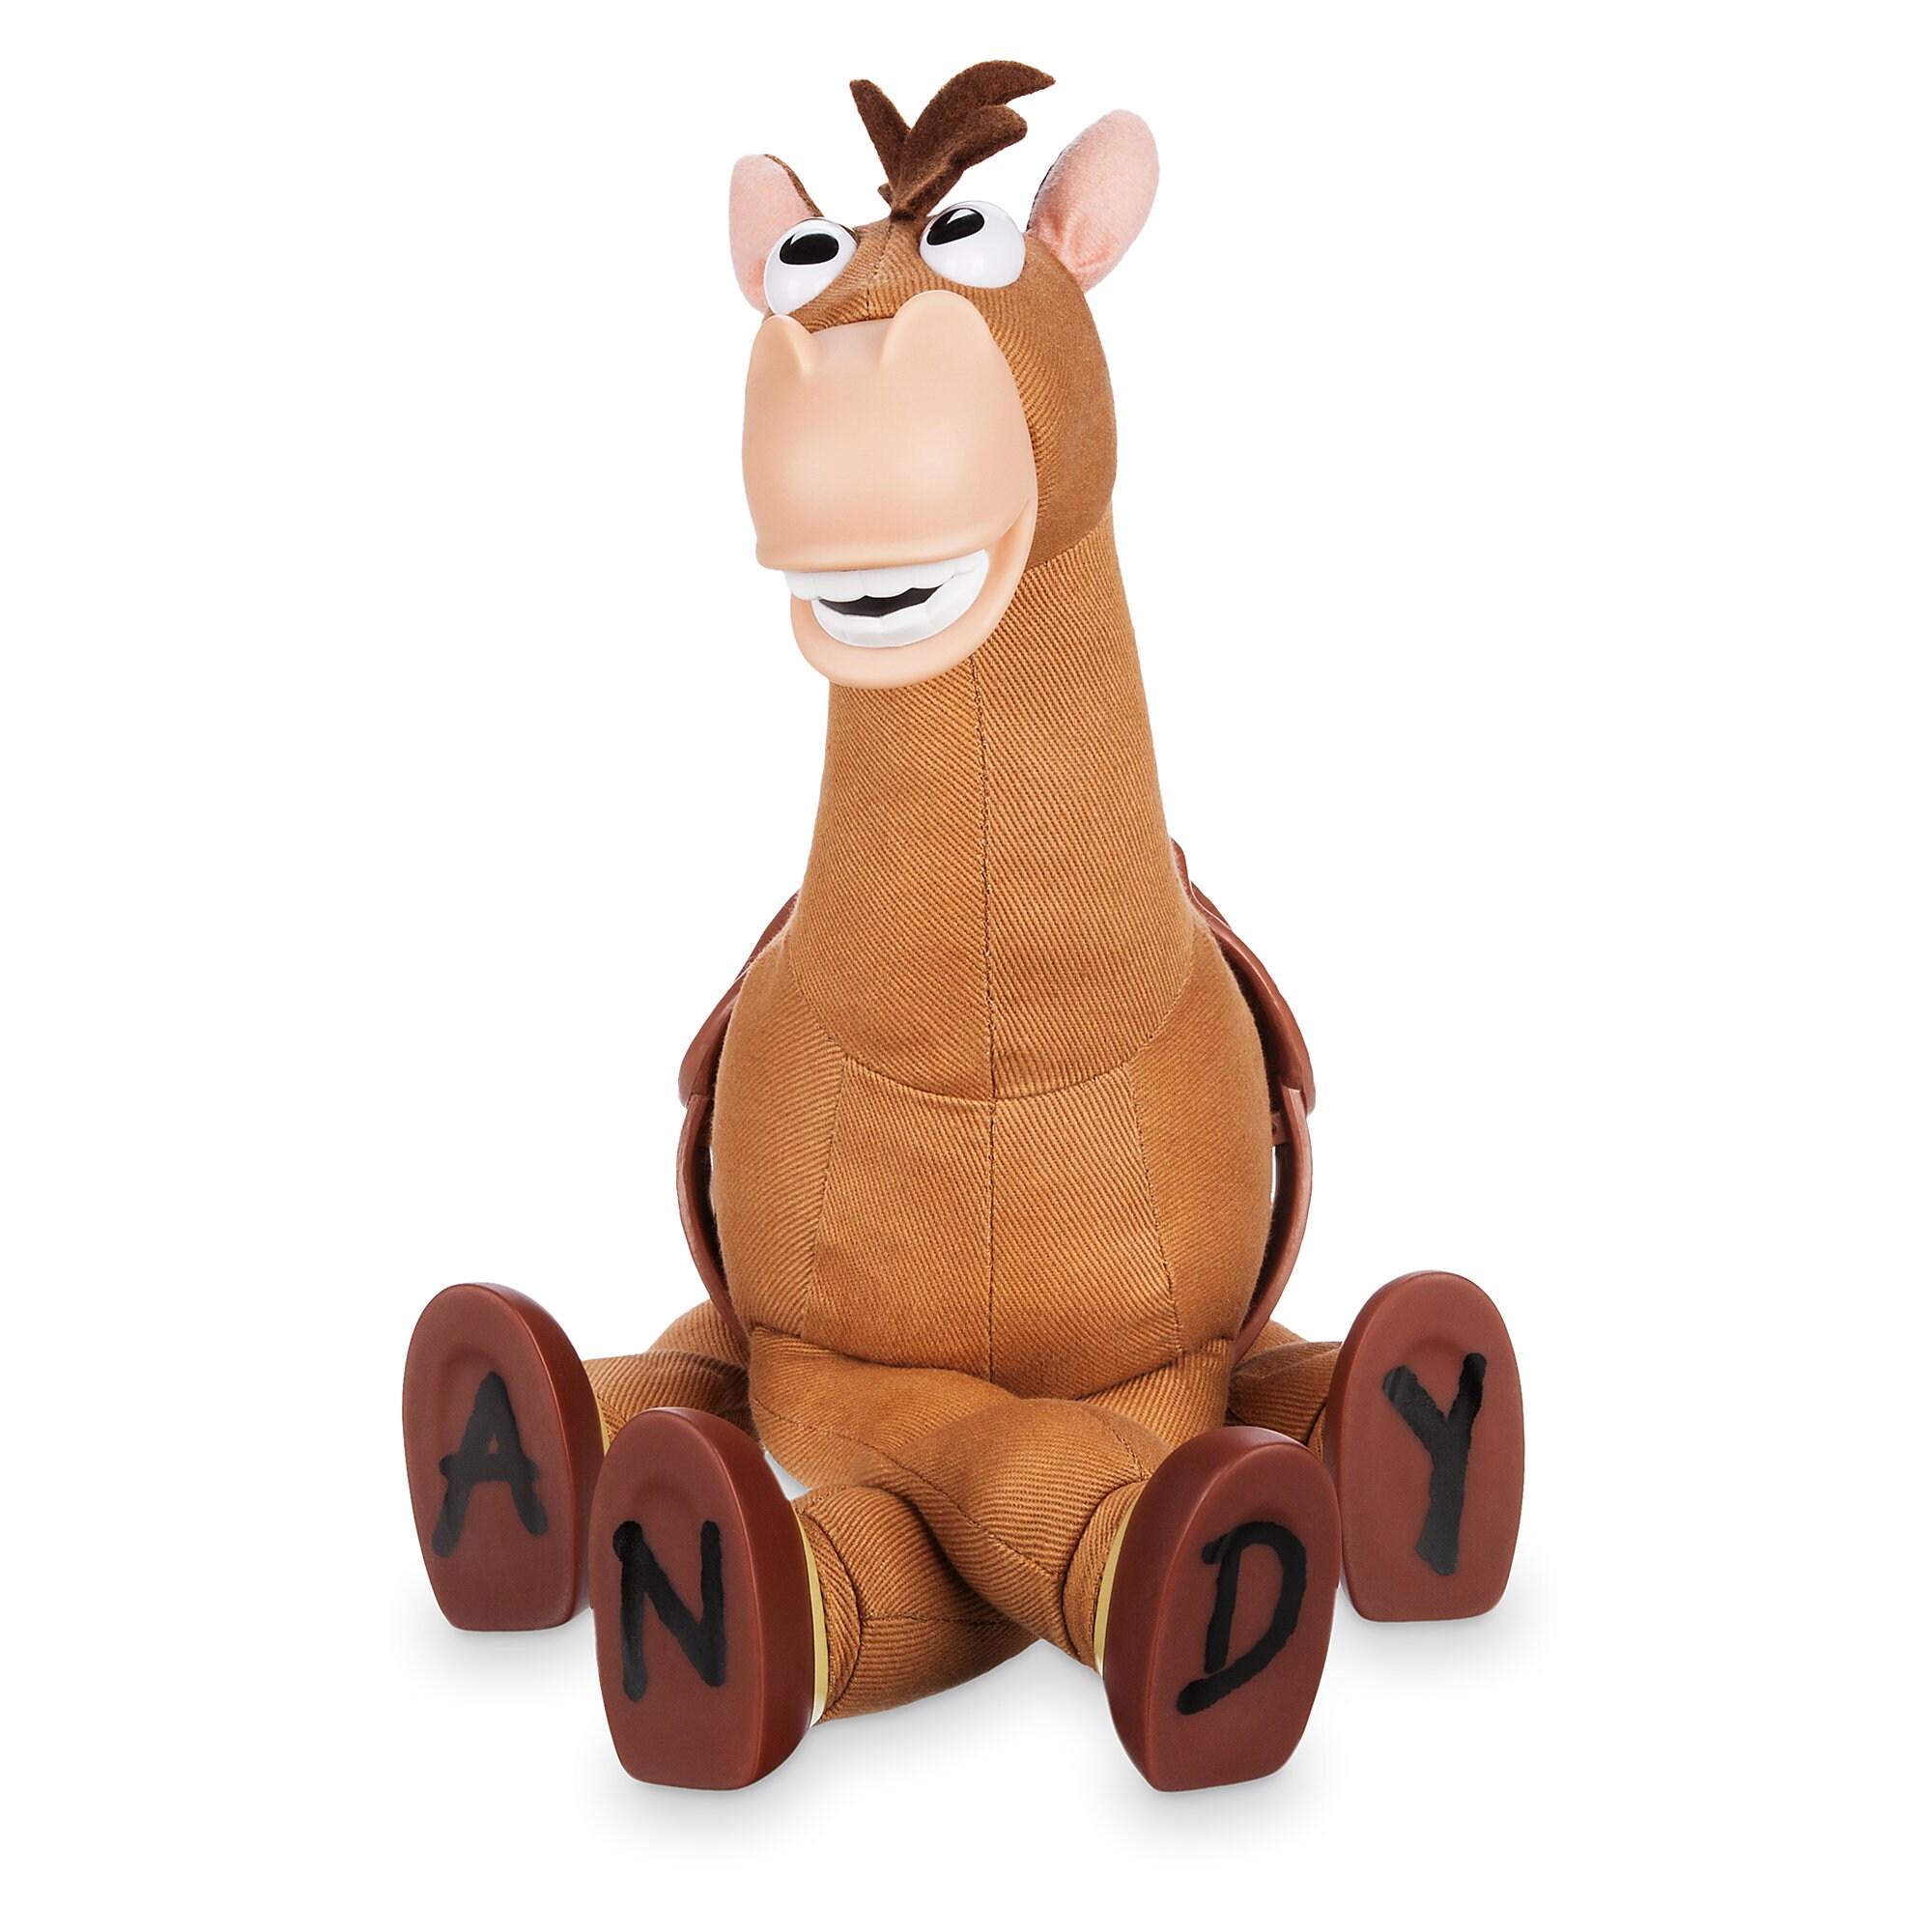 Bullseye Interactive Action Figure with Sound - Toy Story - 18''